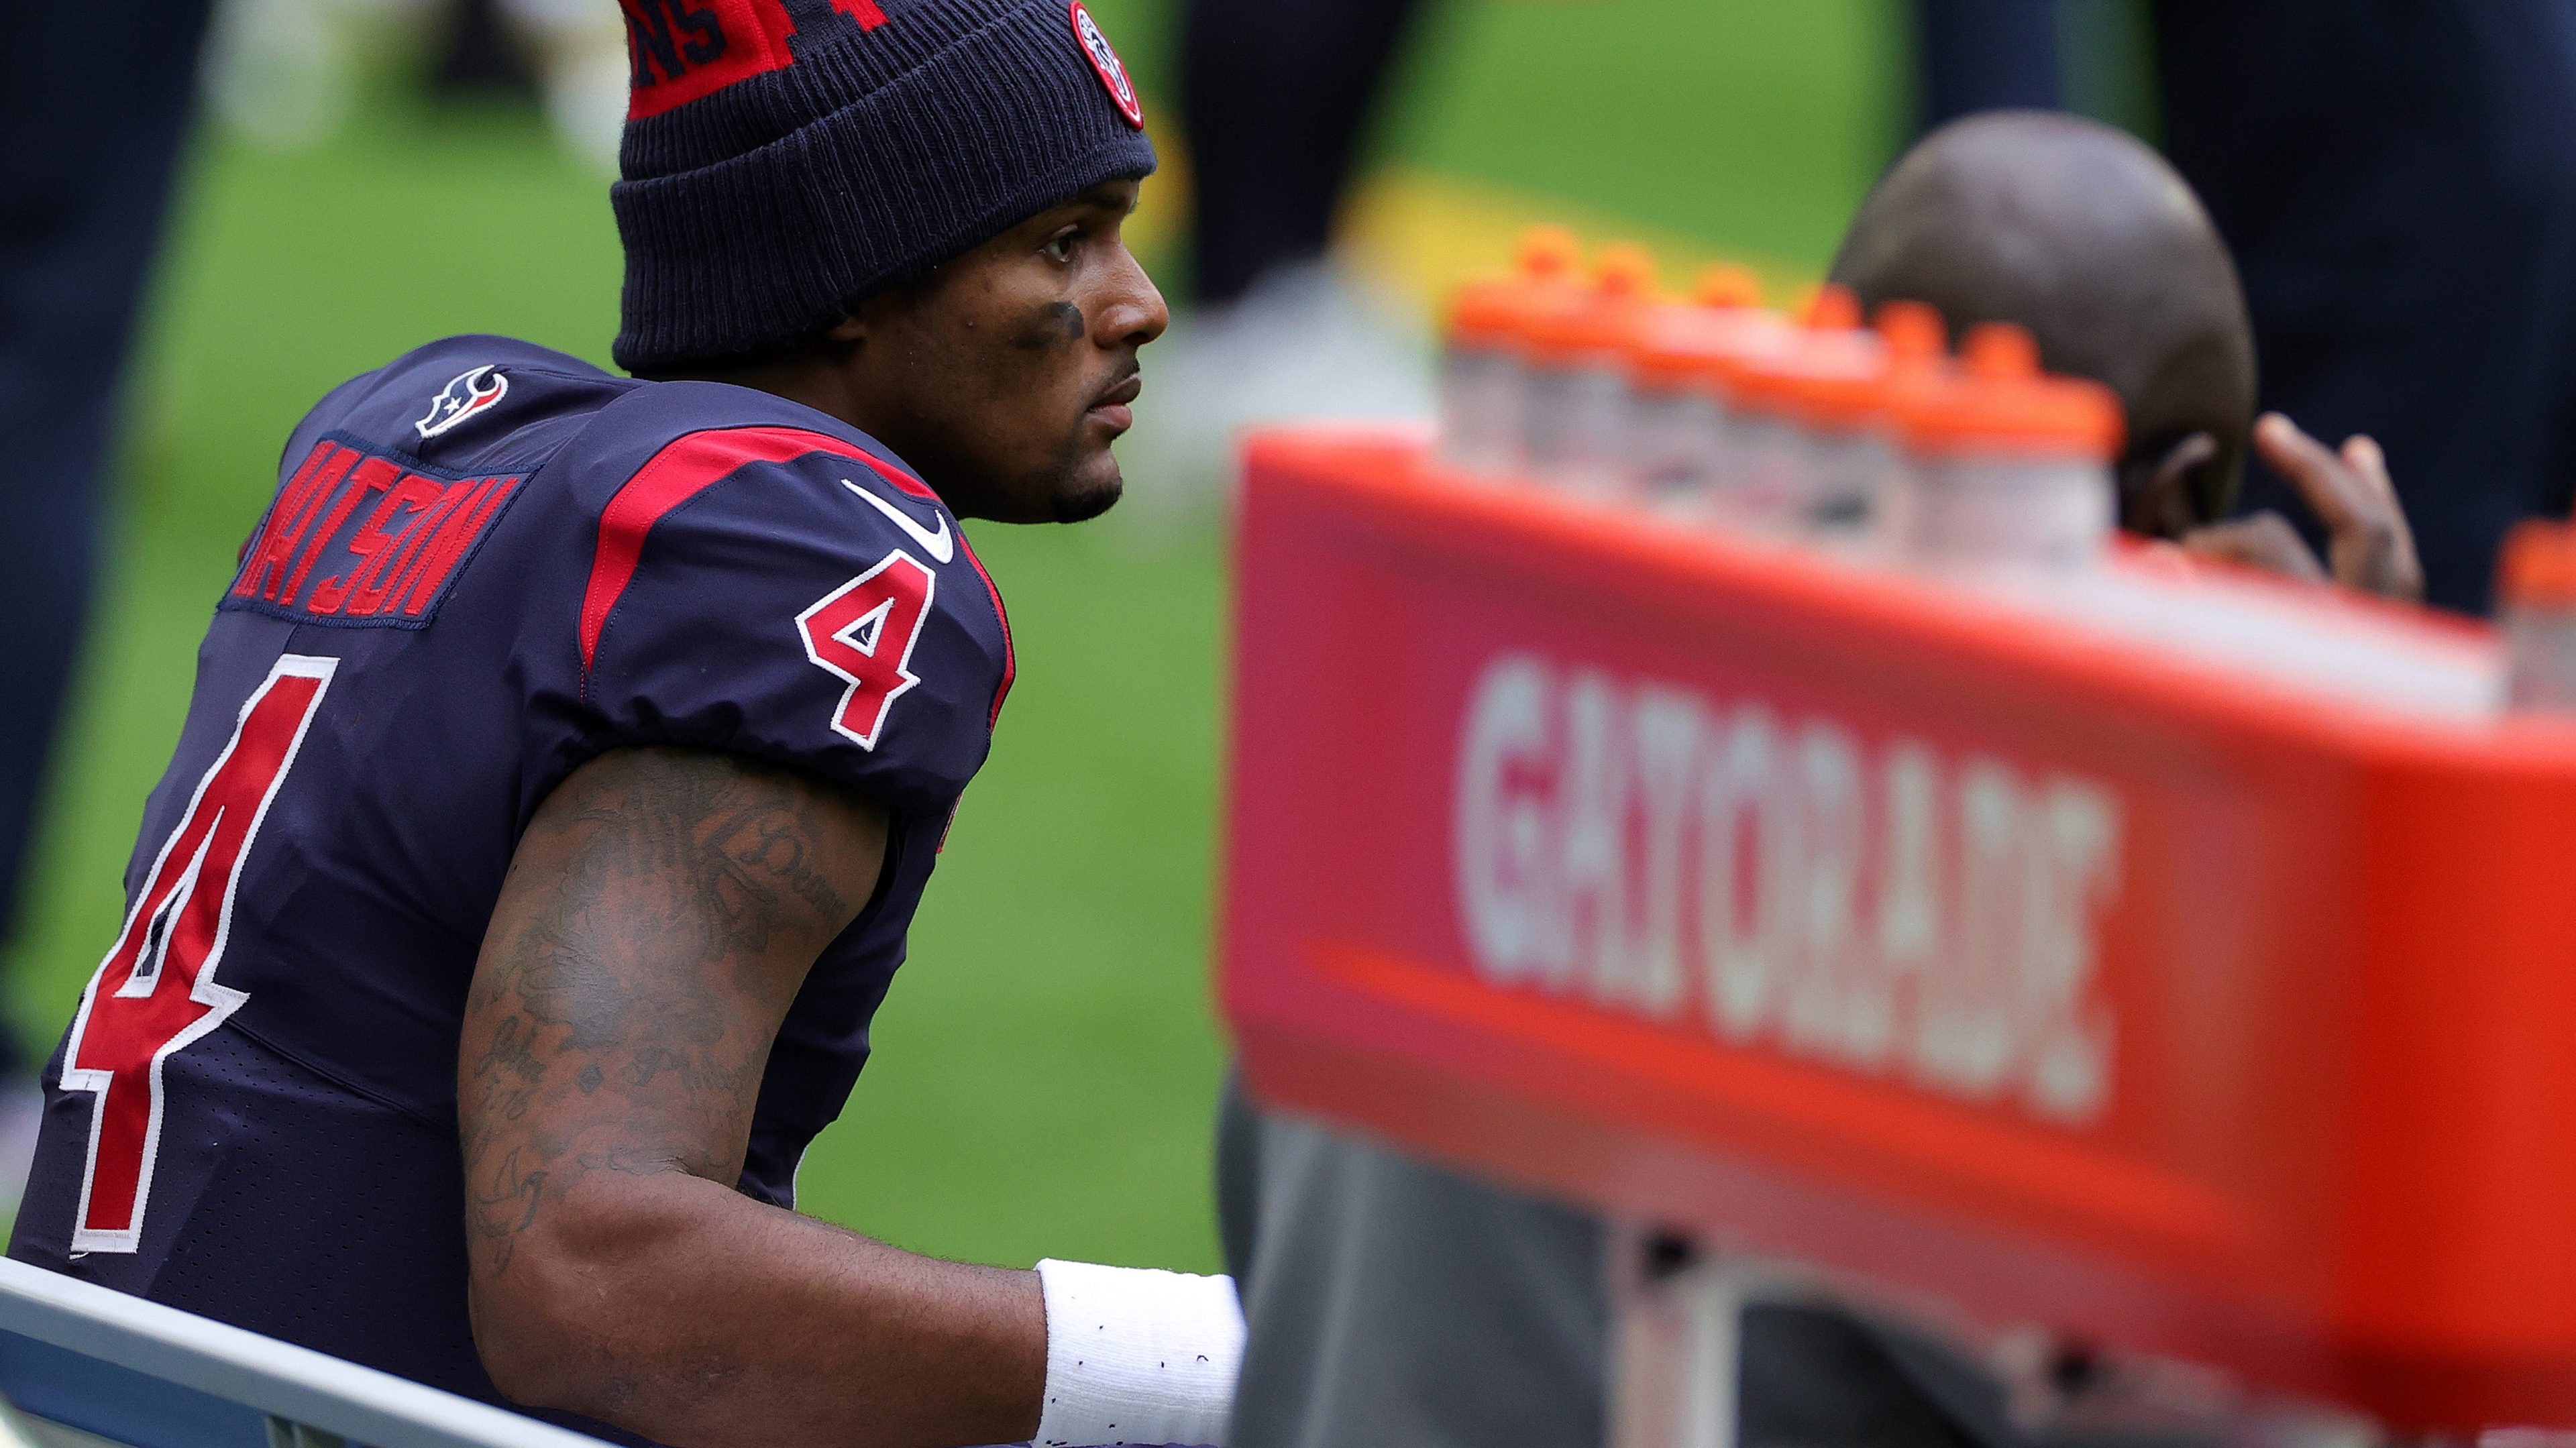 Quarterback Deshaun Watson of the Houston Texans looks on from the bench late in the fourth quarter of the game against the Cincinnati Bengals at NRG Stadium on December 27, 2020 in Houston, Texas.